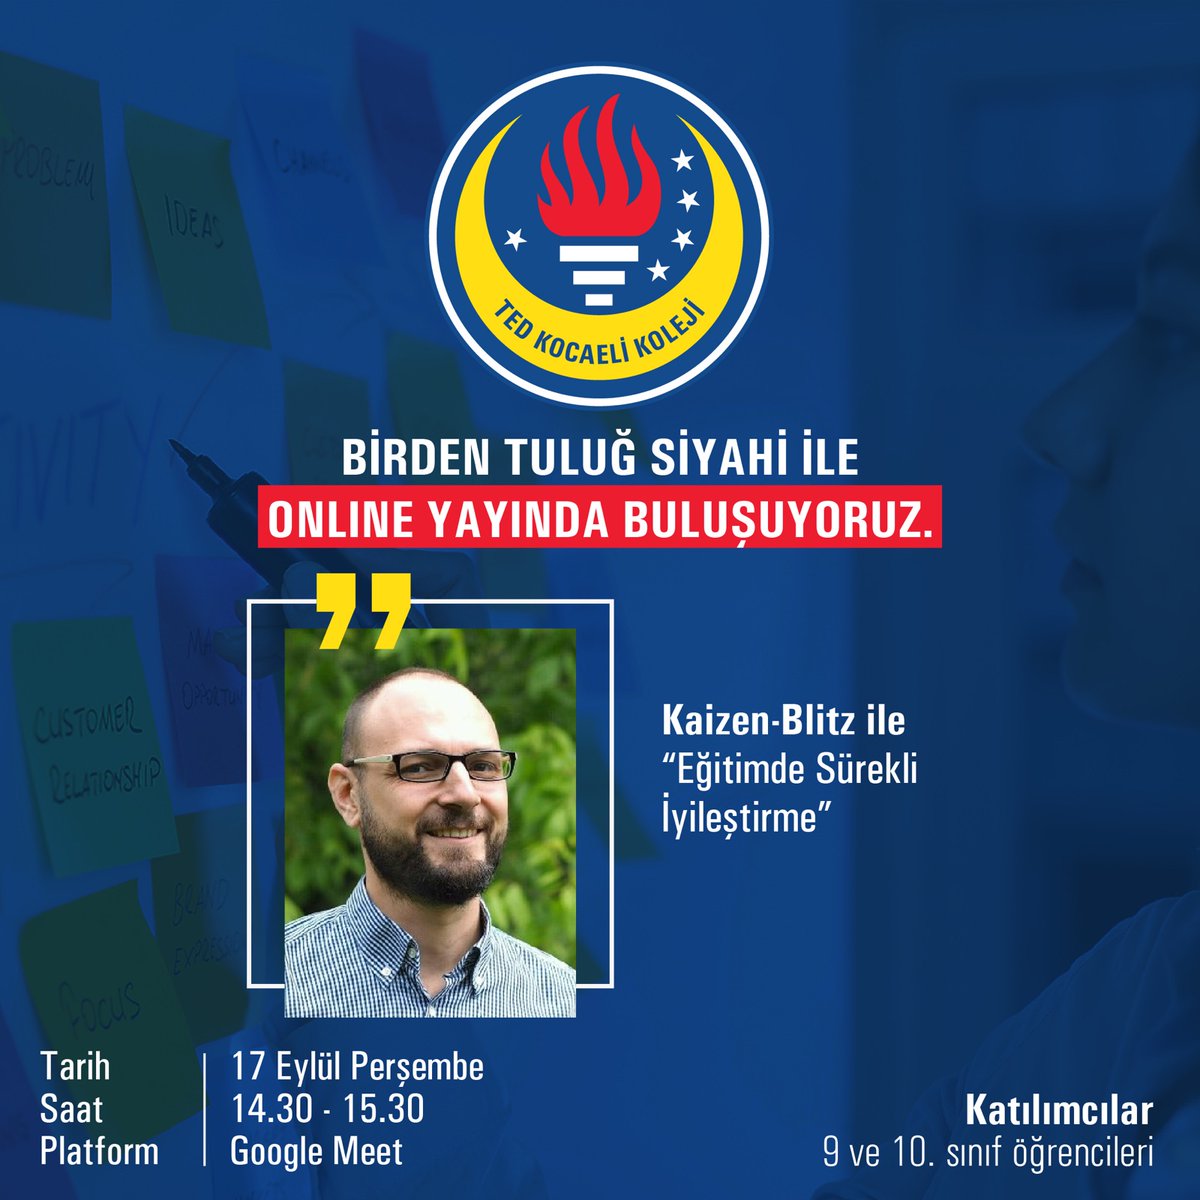 We will be holding a webinar on 'Continuous Improvement in Education with Kaizen' for 9th and 10th grade students at Turkish TED Kocaeli High School on September 17, 2020. @TEDKocaeli 
#lean
#operationalexcellence
#continuosimprovement
#training
#kaizen